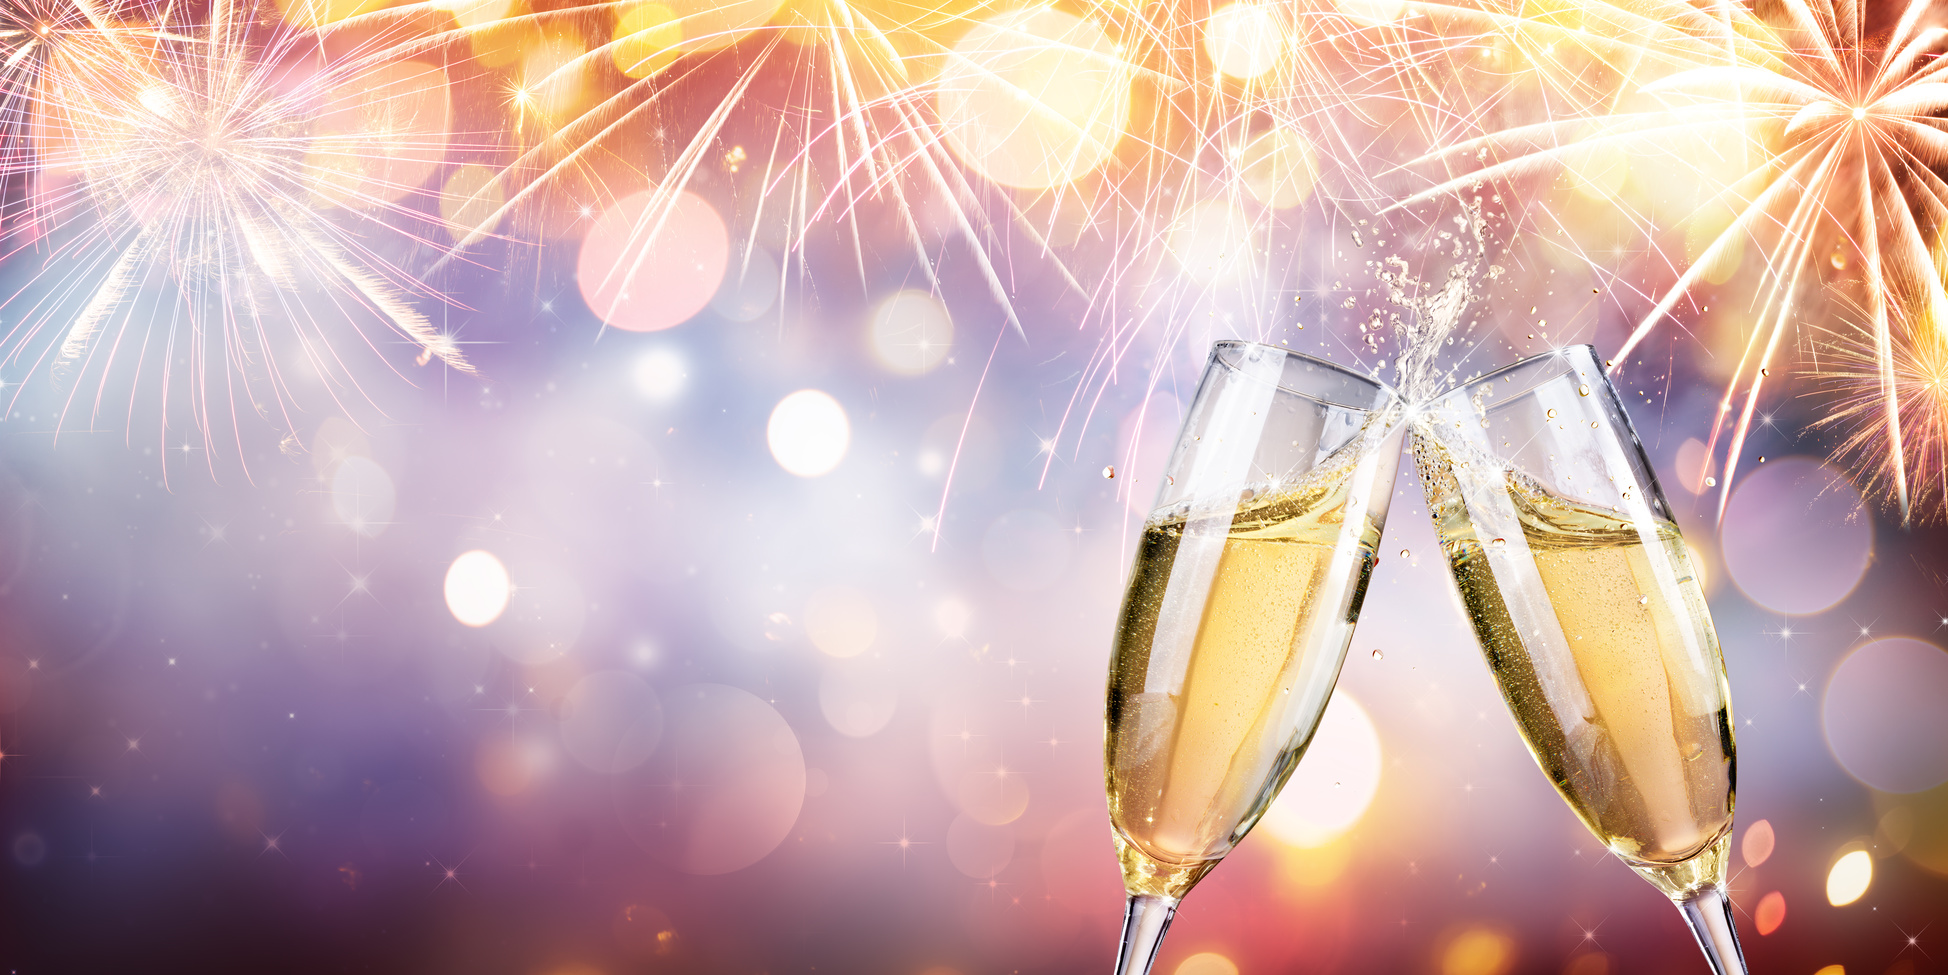 Congratulation With Champagne - Toast With Flutes And Fireworks